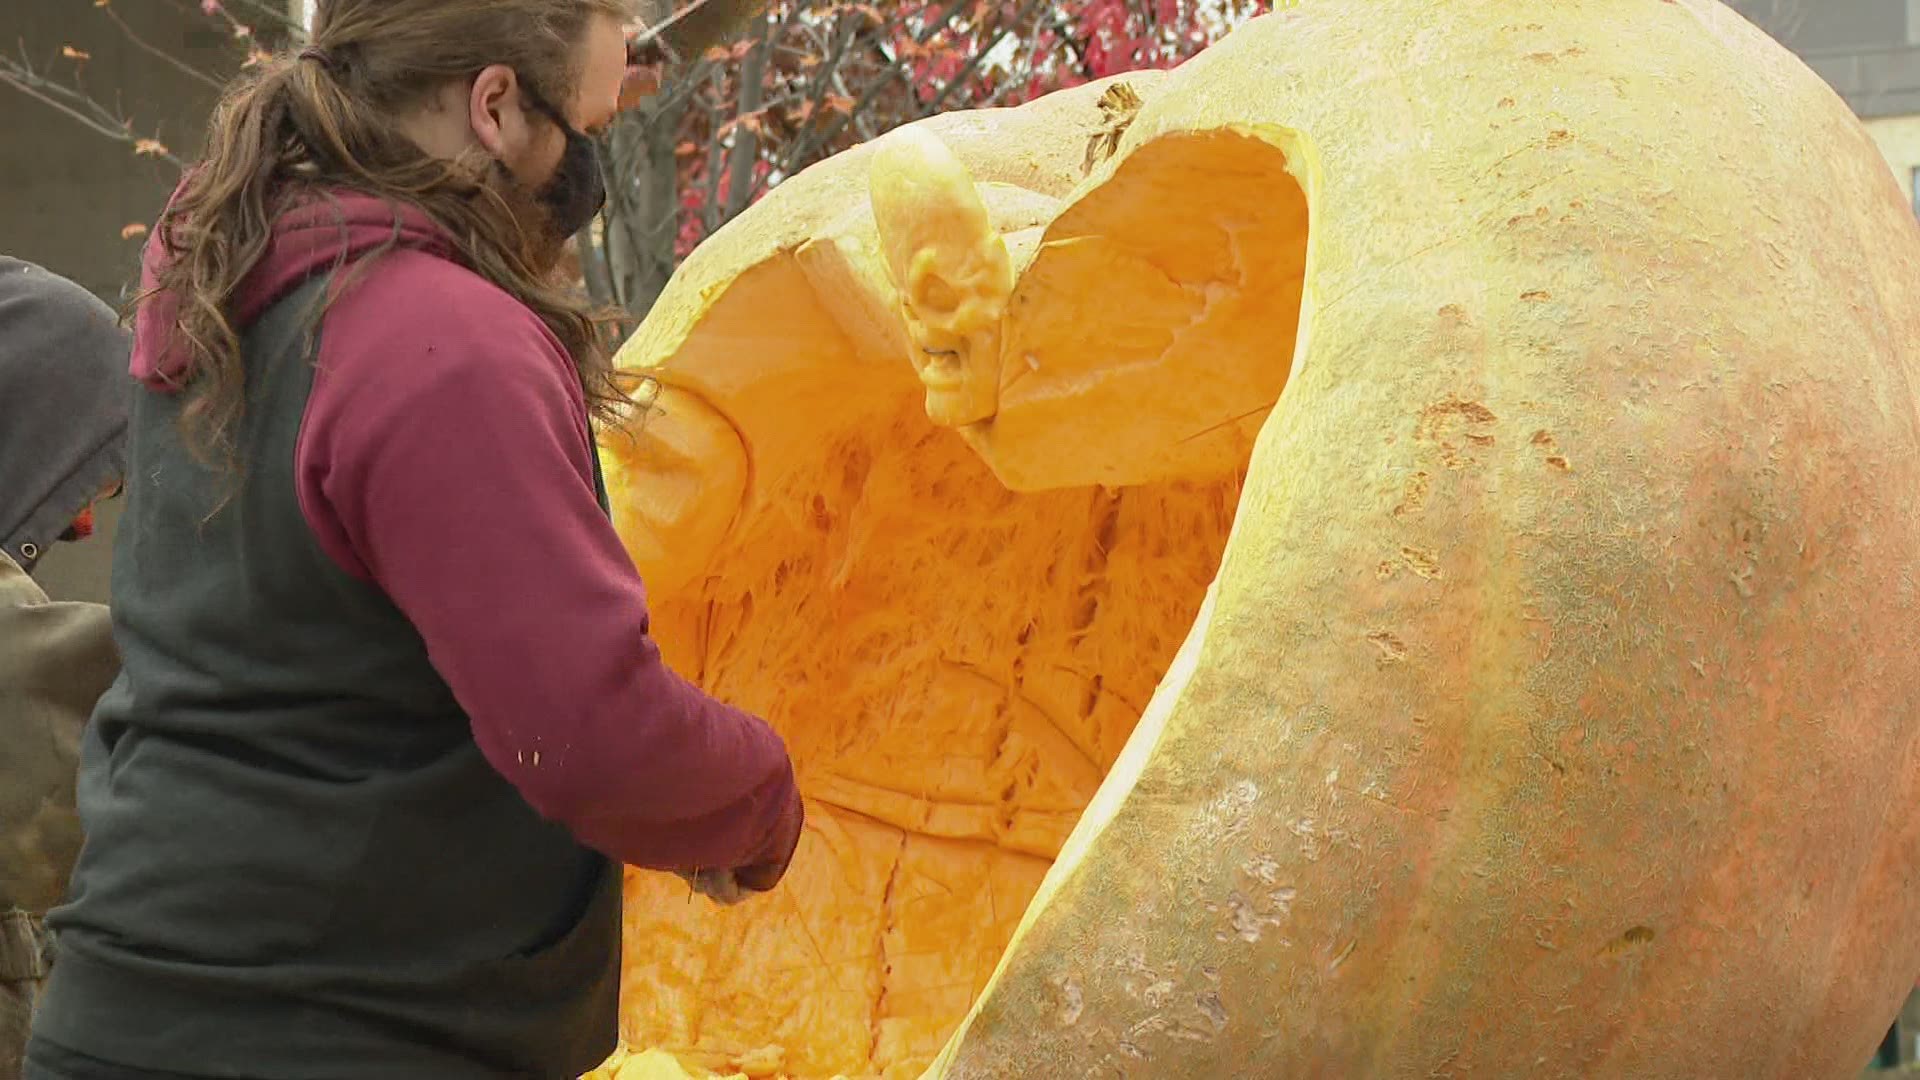 More that 120 hours of carving had already gone into it, but Ice Guru Randy Finch finished off carving out a 1,300 pound pumpkin Friday afternoon.